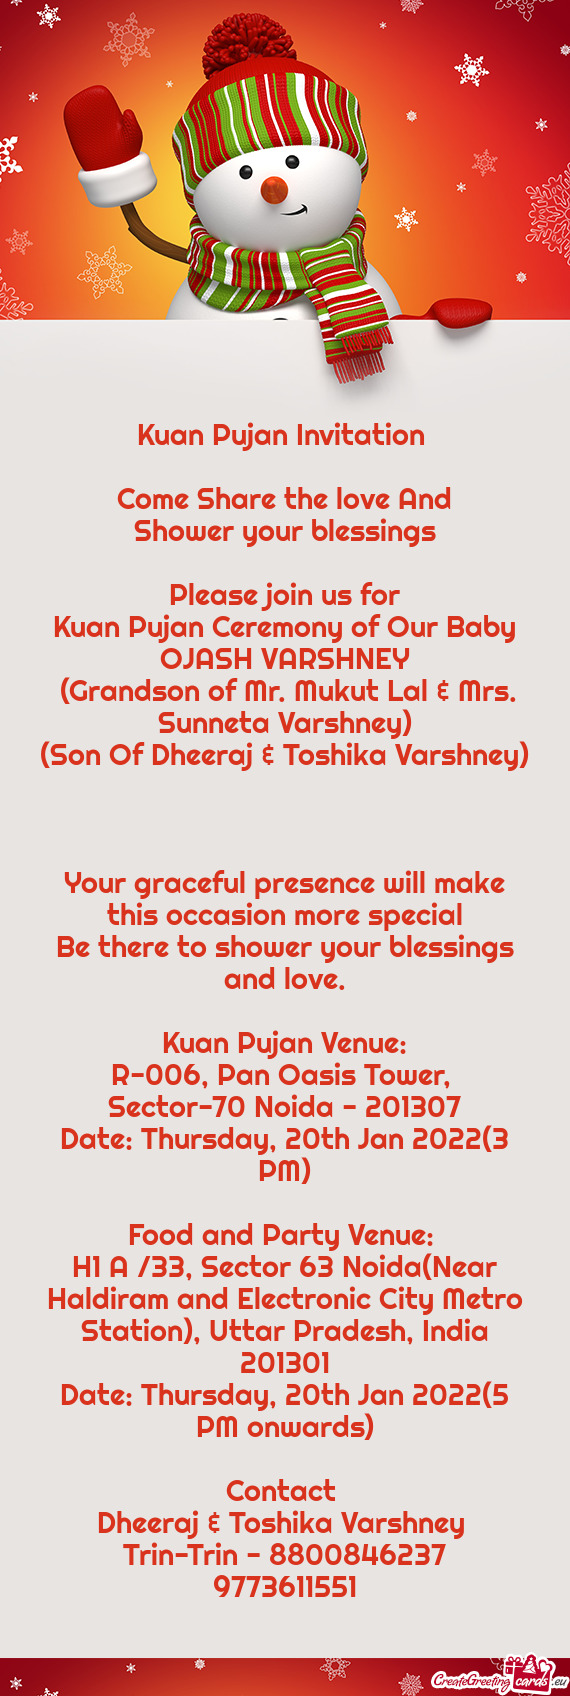 Kuan Pujan Ceremony of Our Baby OJASH VARSHNEY